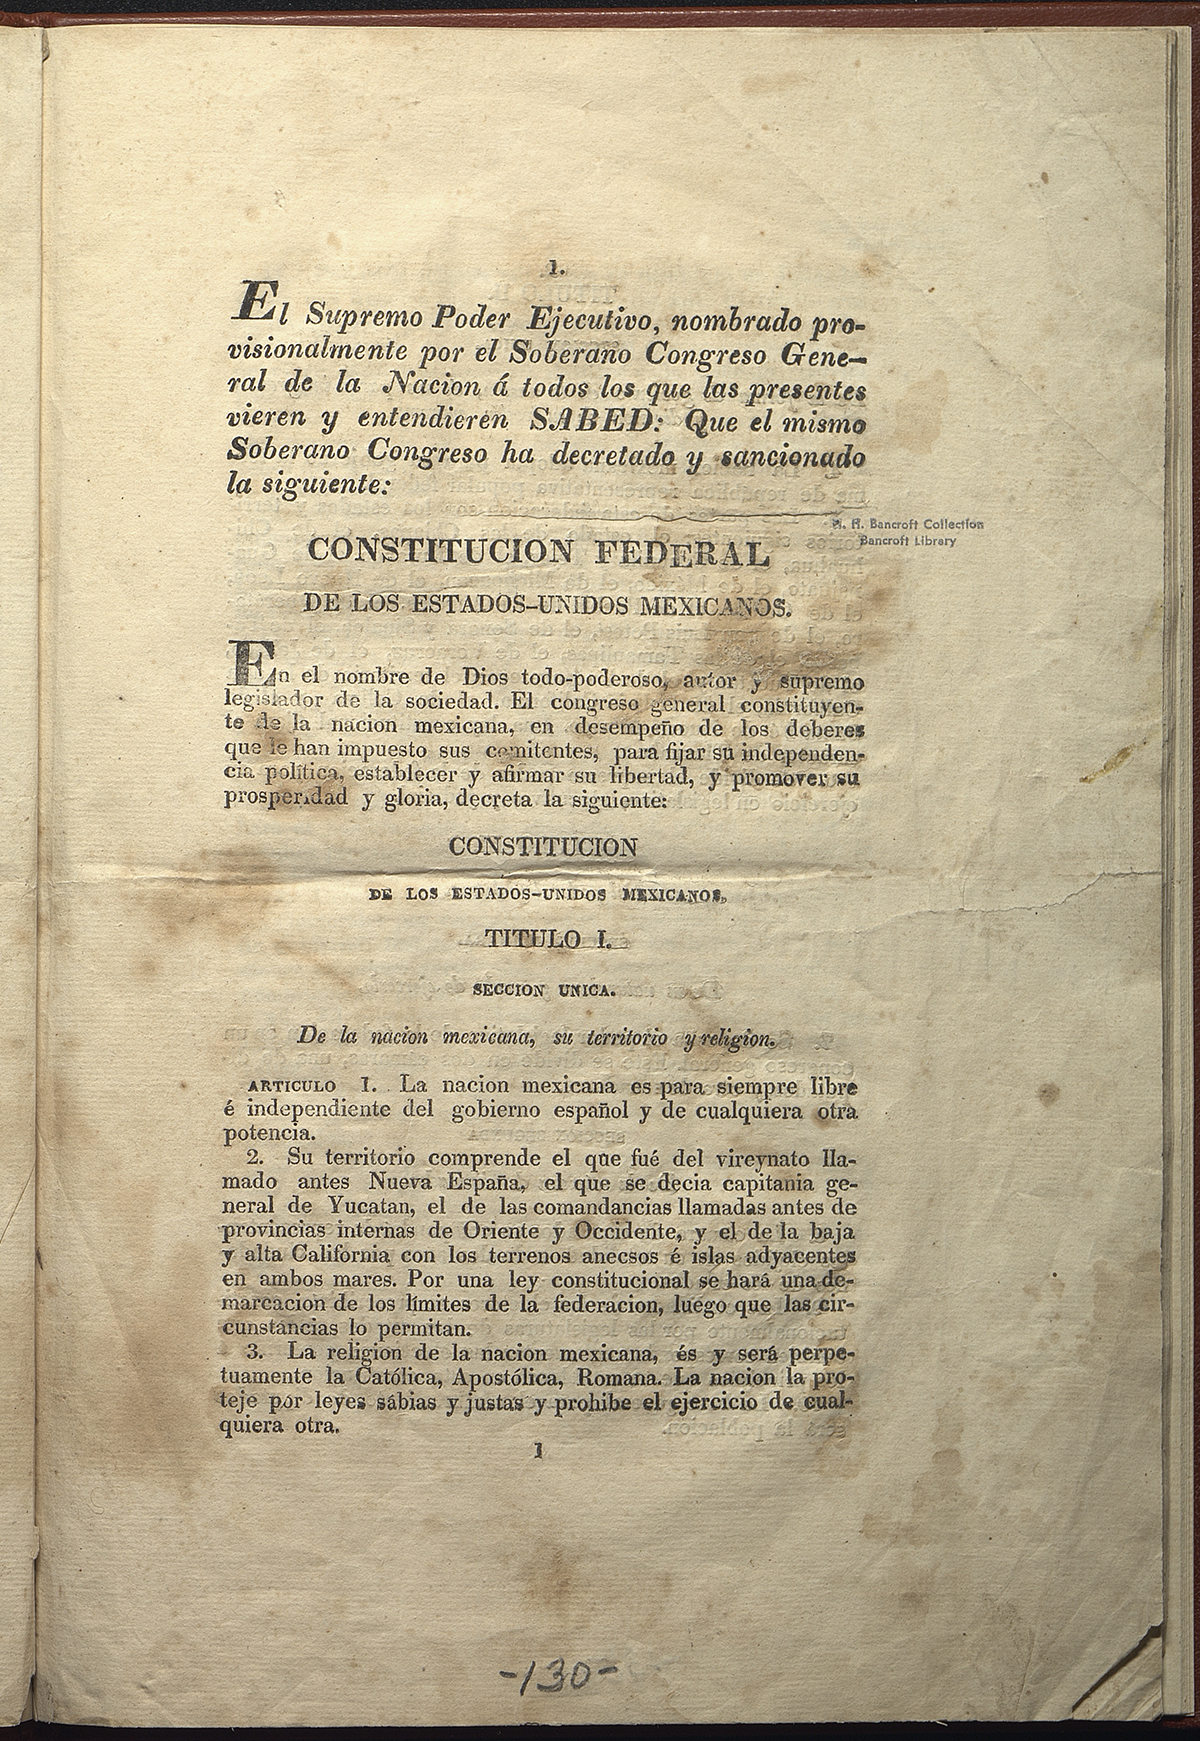 Preamble; Title I, Only Section, Articles 1-3